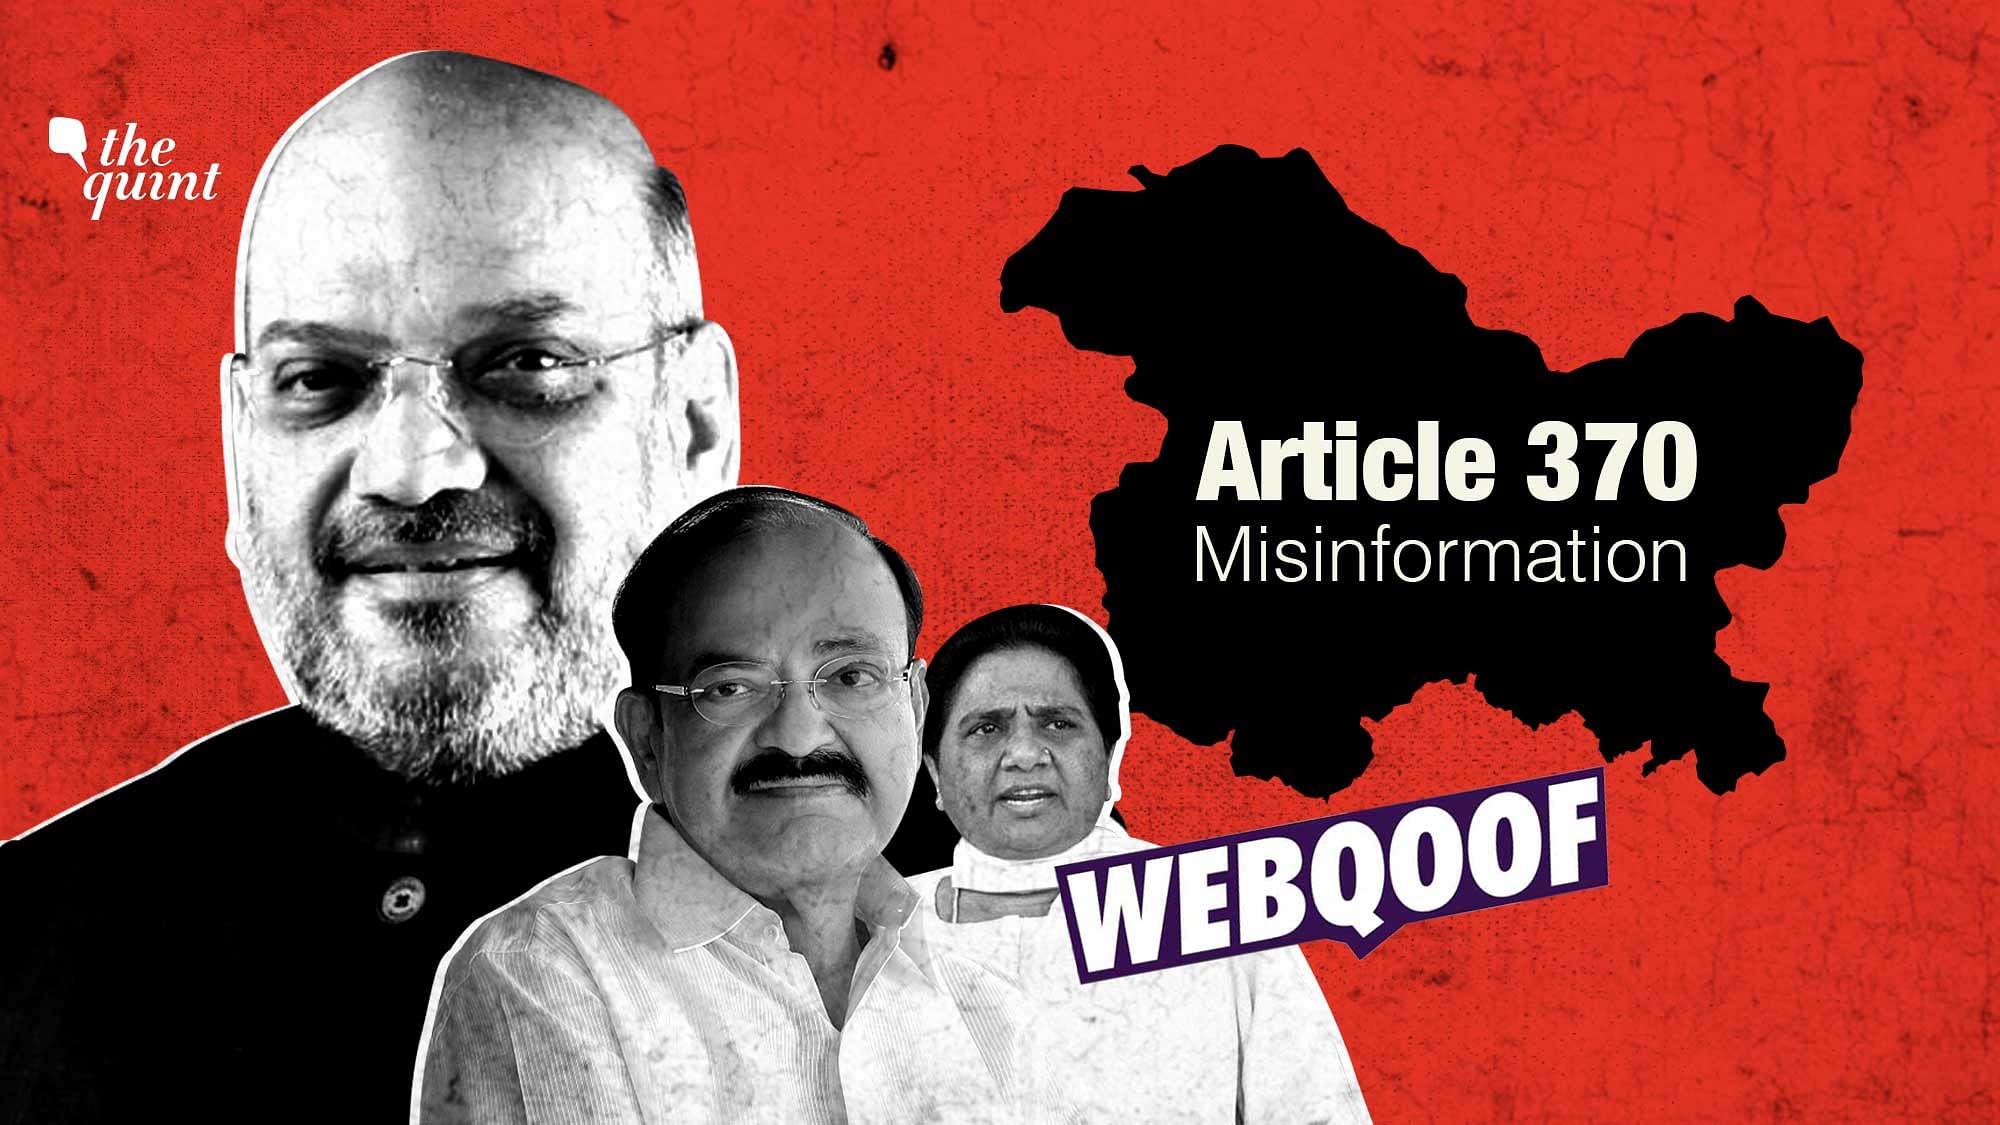 Abrogation of Article 370 led to a barrage of misinformation on social media.